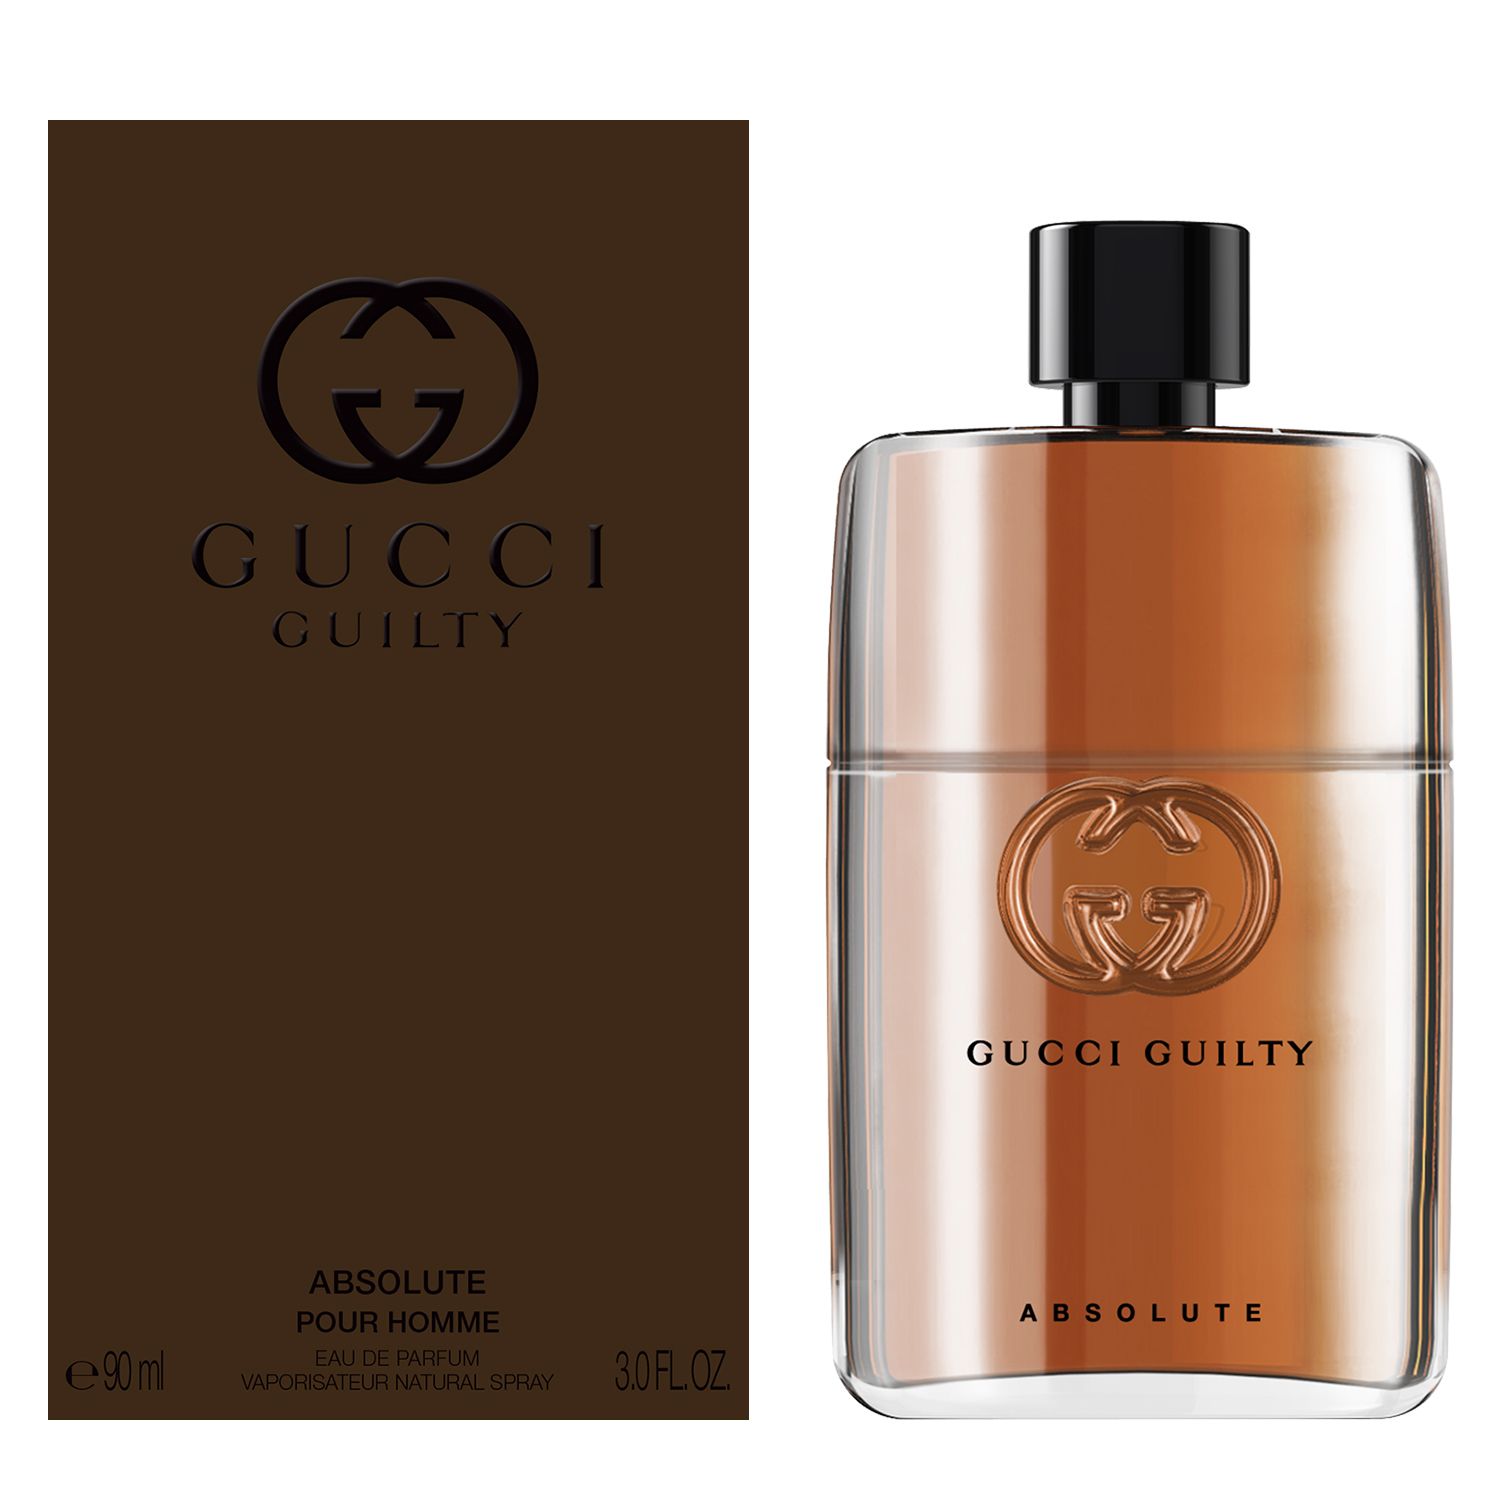 Gucci guilty absolute pour femme EDP 50ml. Gucci guilty absolute. Gucci guilty absolute pour femme,90 мл. Gucci guilty absolute pour femme.